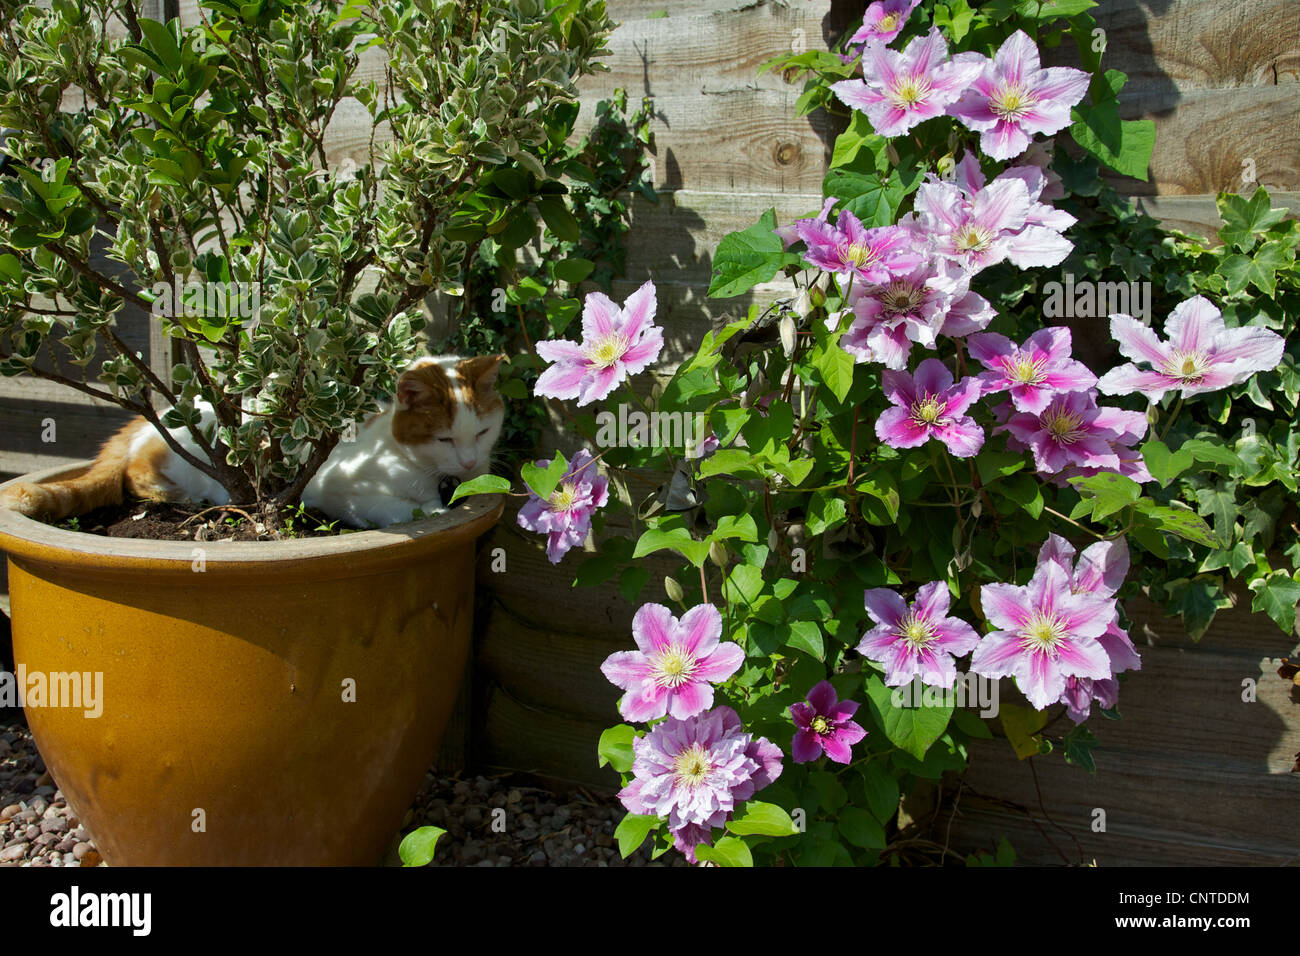 A Clematis plant with a sleeping cat. England Stock Photo